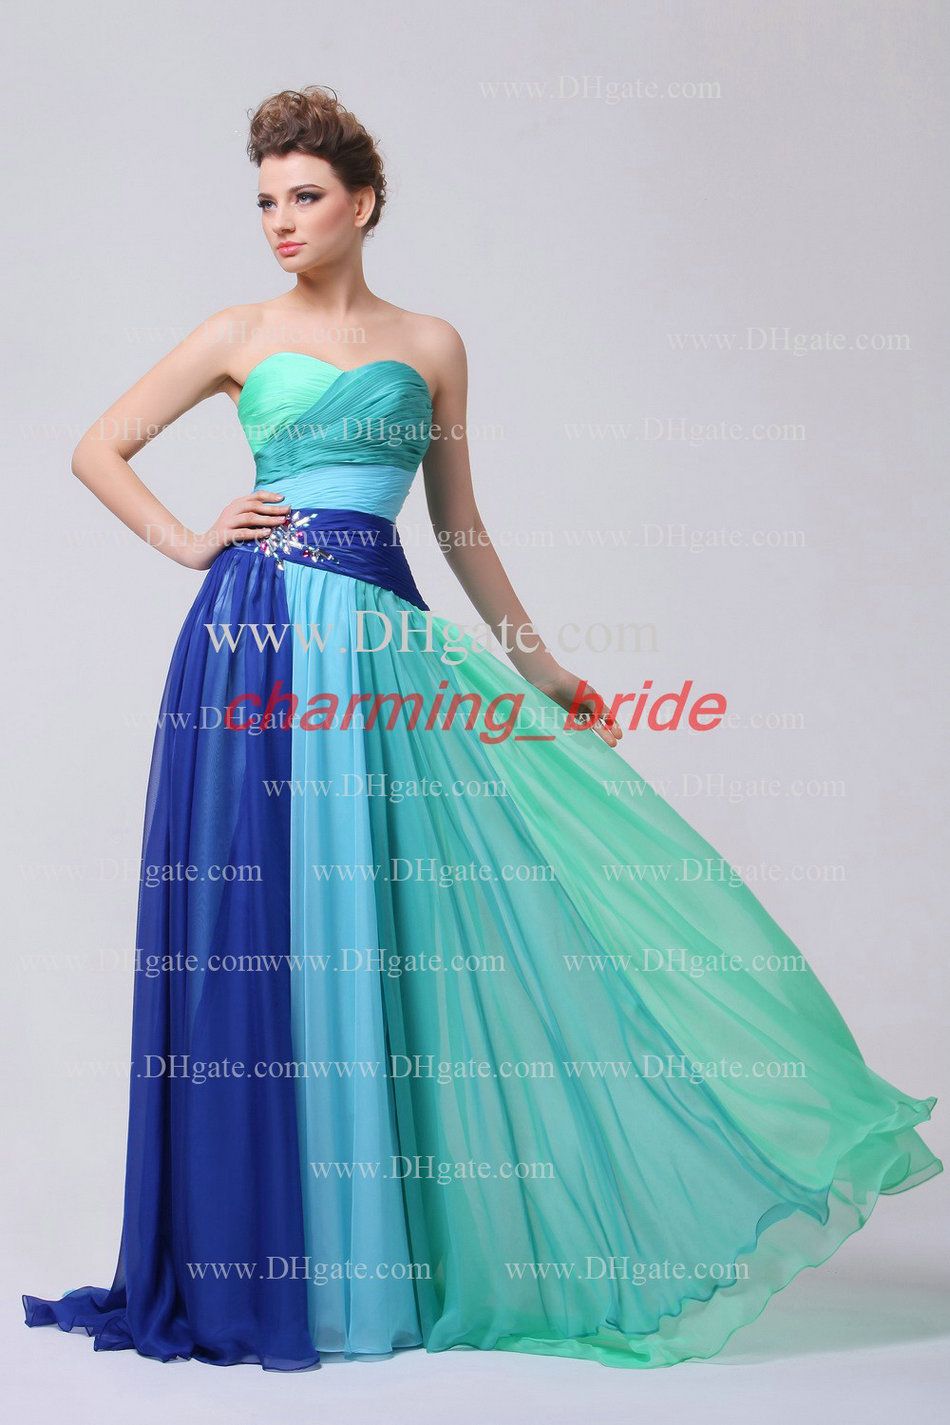 2013 Unique Multi Colored Party Dresses Sweetheart Chiffon Crystal Prom ...